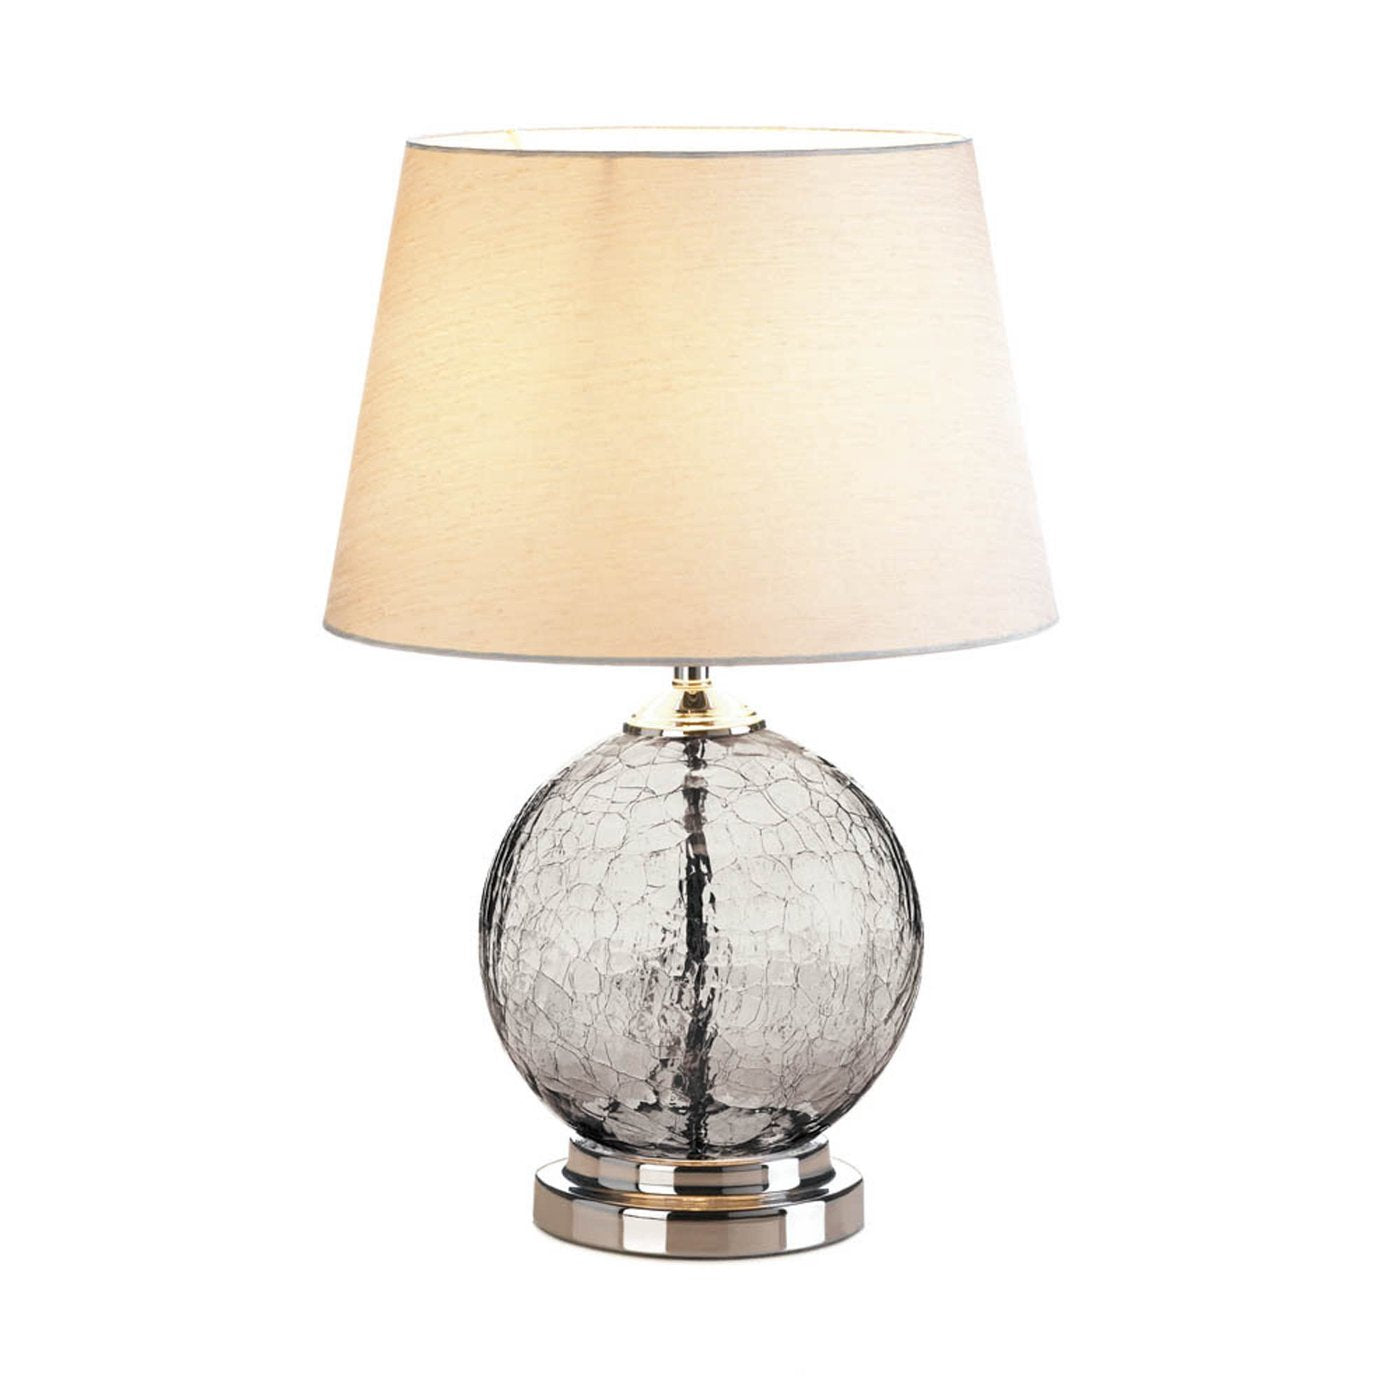 Grey Cracked Glass Table Lamp